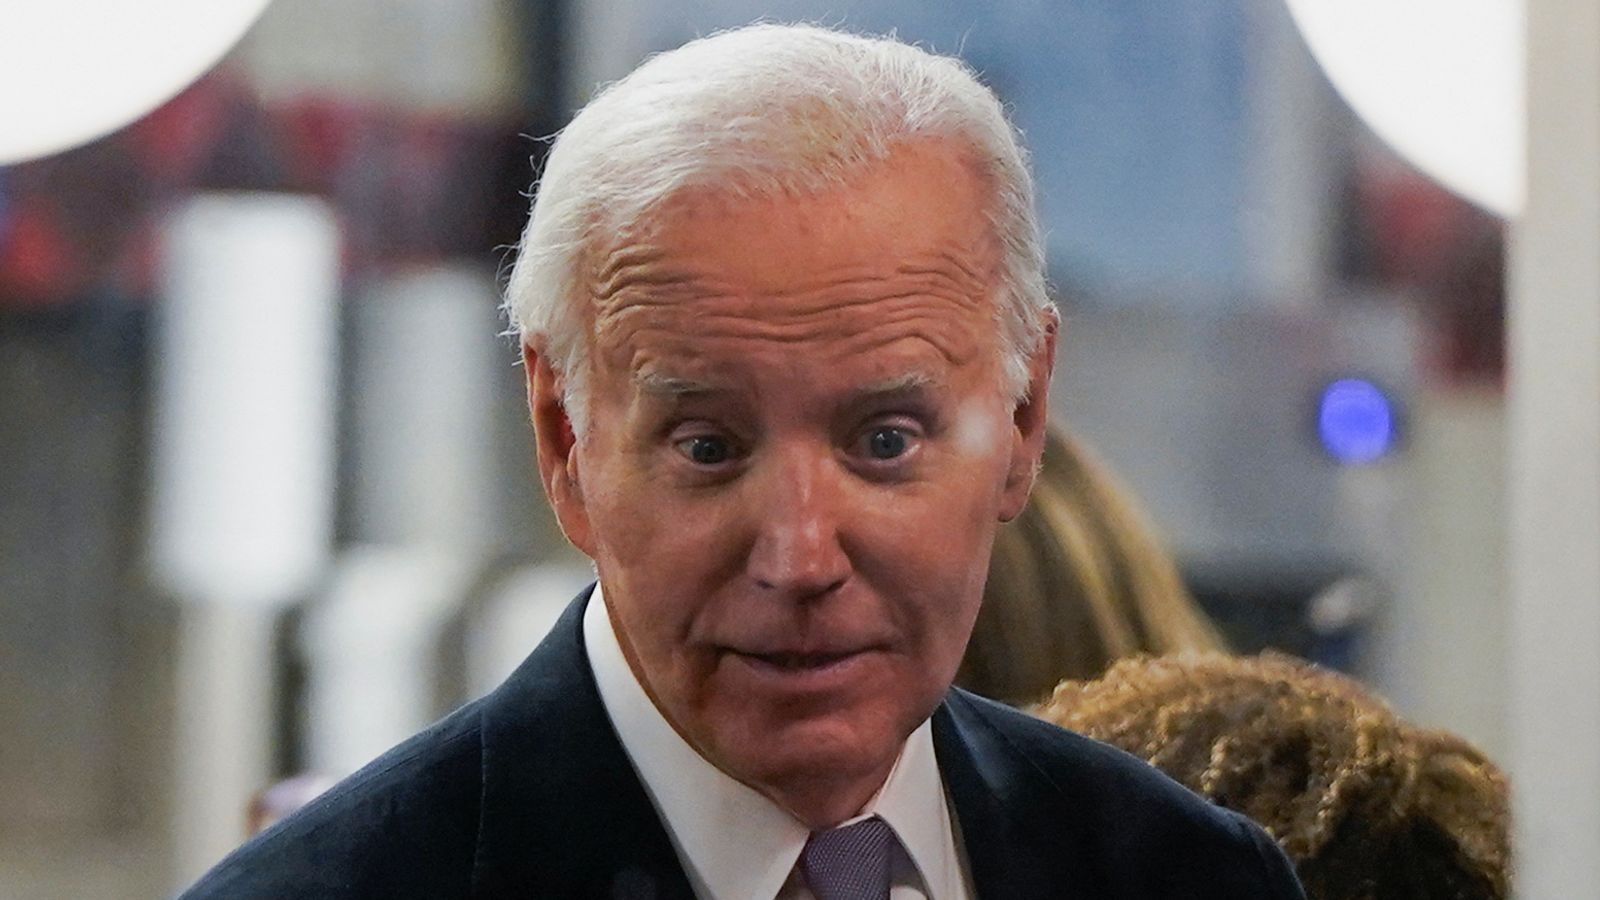 Biden’s ‘excruciating’ debate performance leaves Democrats angry his ego could see them lose election